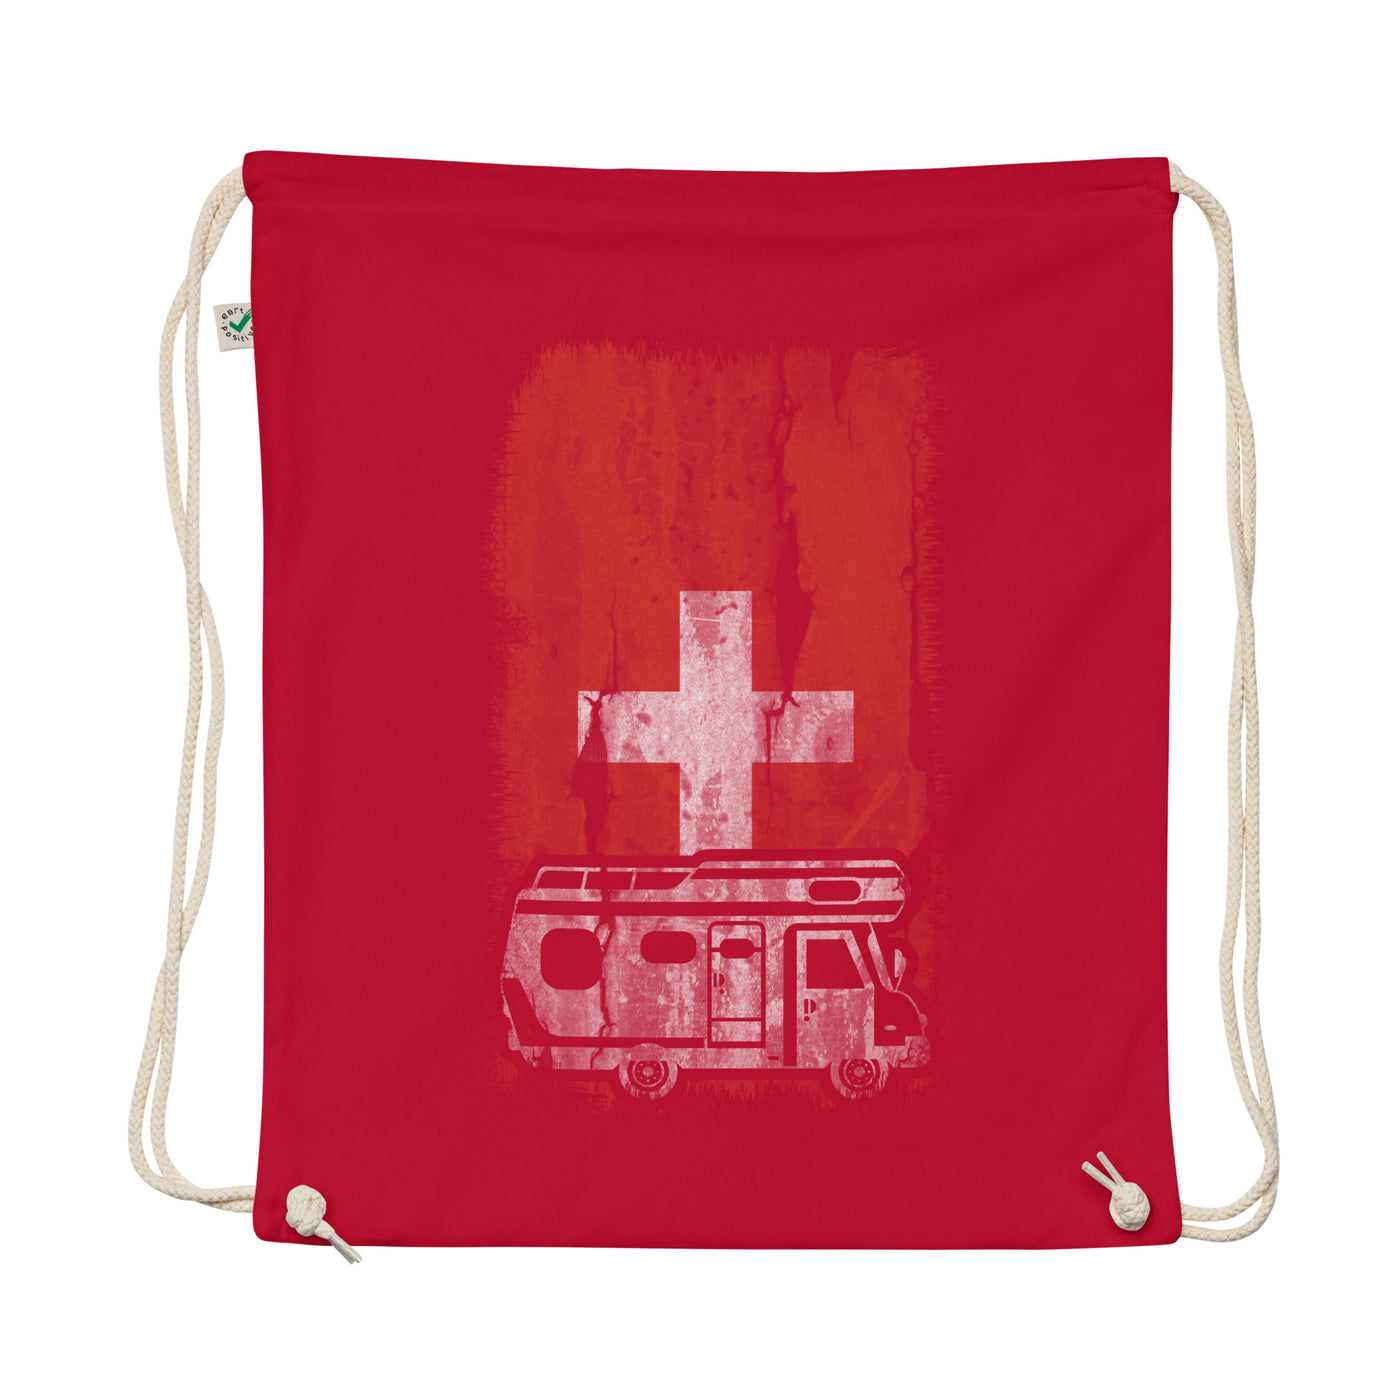 Swiss Flag And Camping - Organic Turnbeutel camping